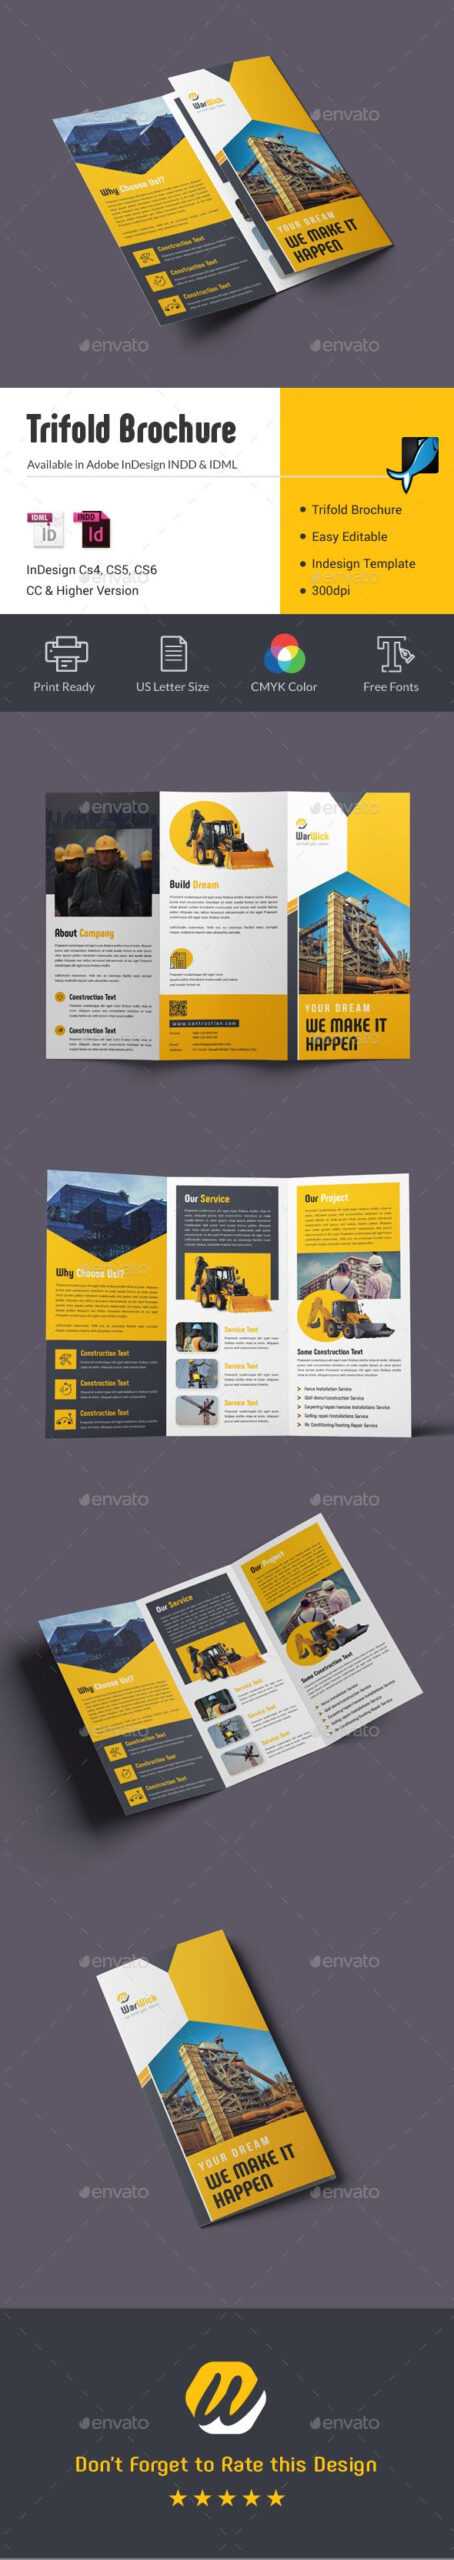 Construction Trifold Brochure Template Indesign Indd – Us Within Adobe Indesign Tri Fold Brochure Template